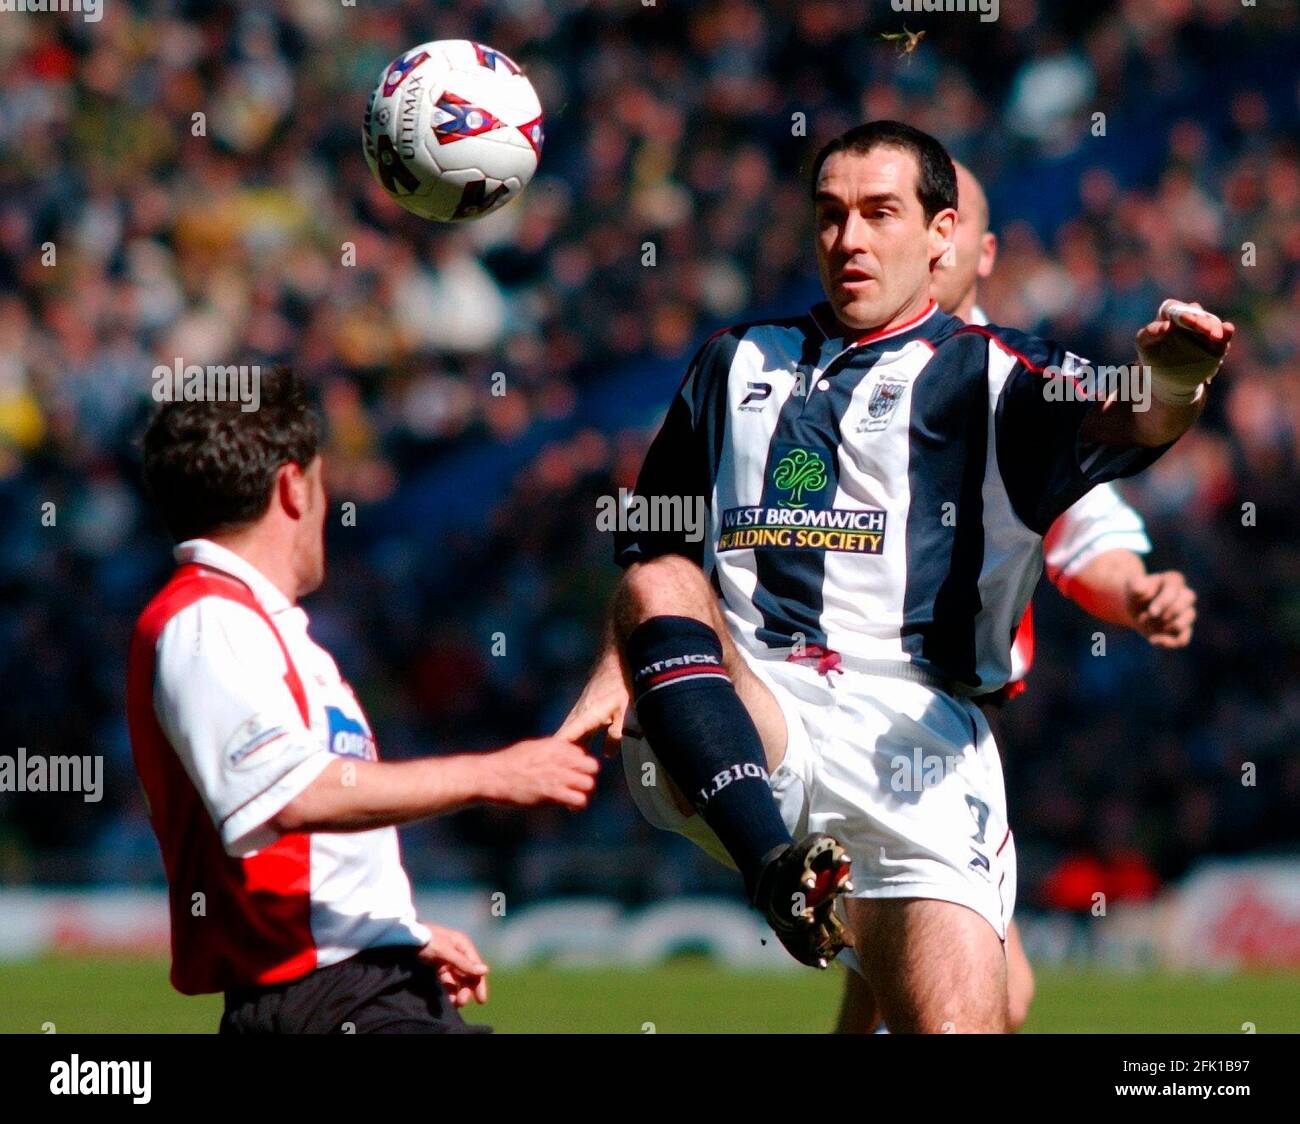 WEST BROM V ROTHERHAM 7/4/2002 MARTIN McINTOSH AND BOB TAYLOR PICTURE ...